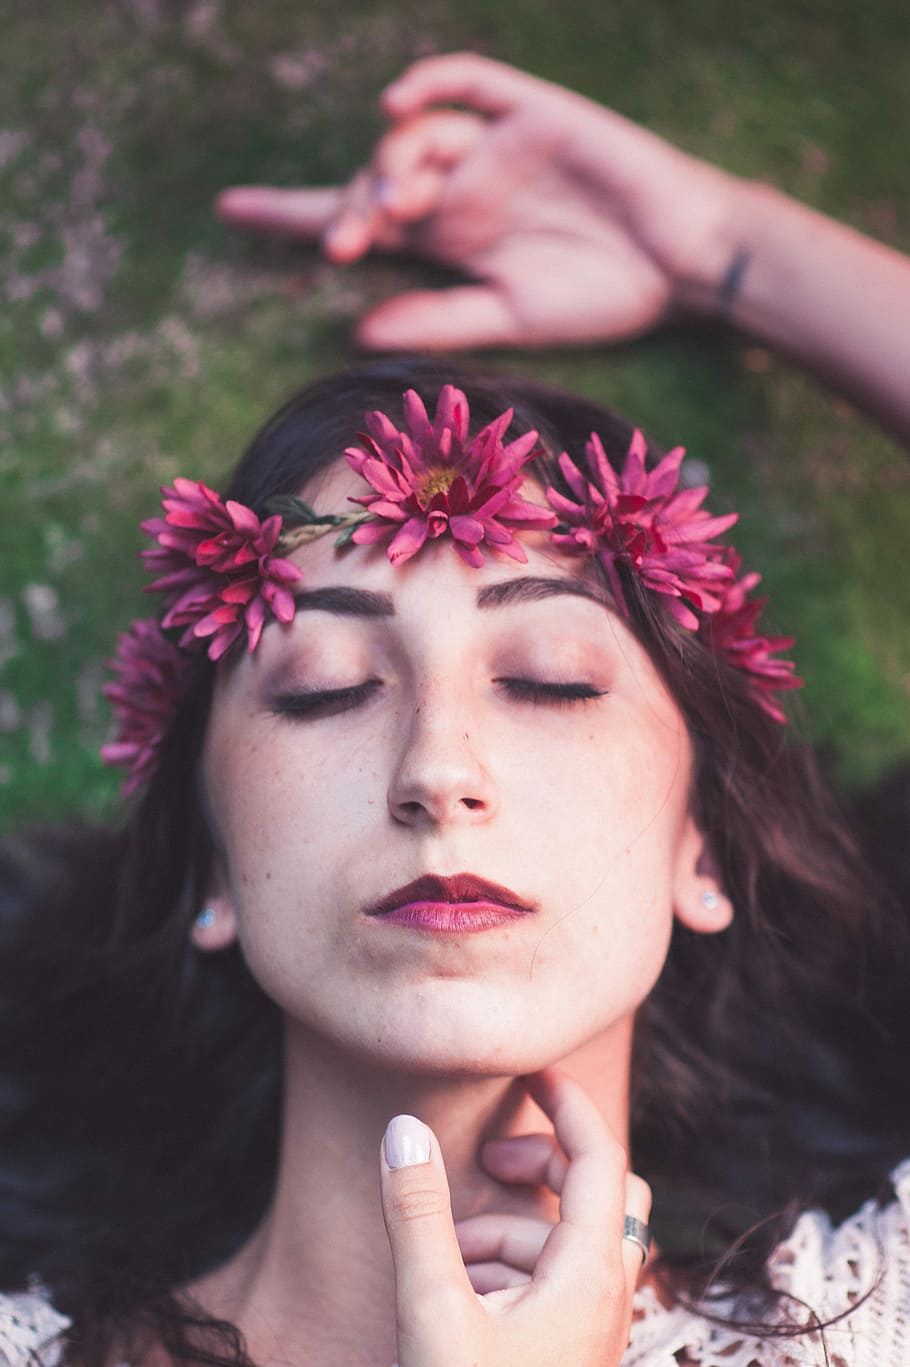 woman wearing pink floral headdress portrait selective focus photography, shallow focus photo of woman closing her eyes with pink flower crown, HD wallpaper